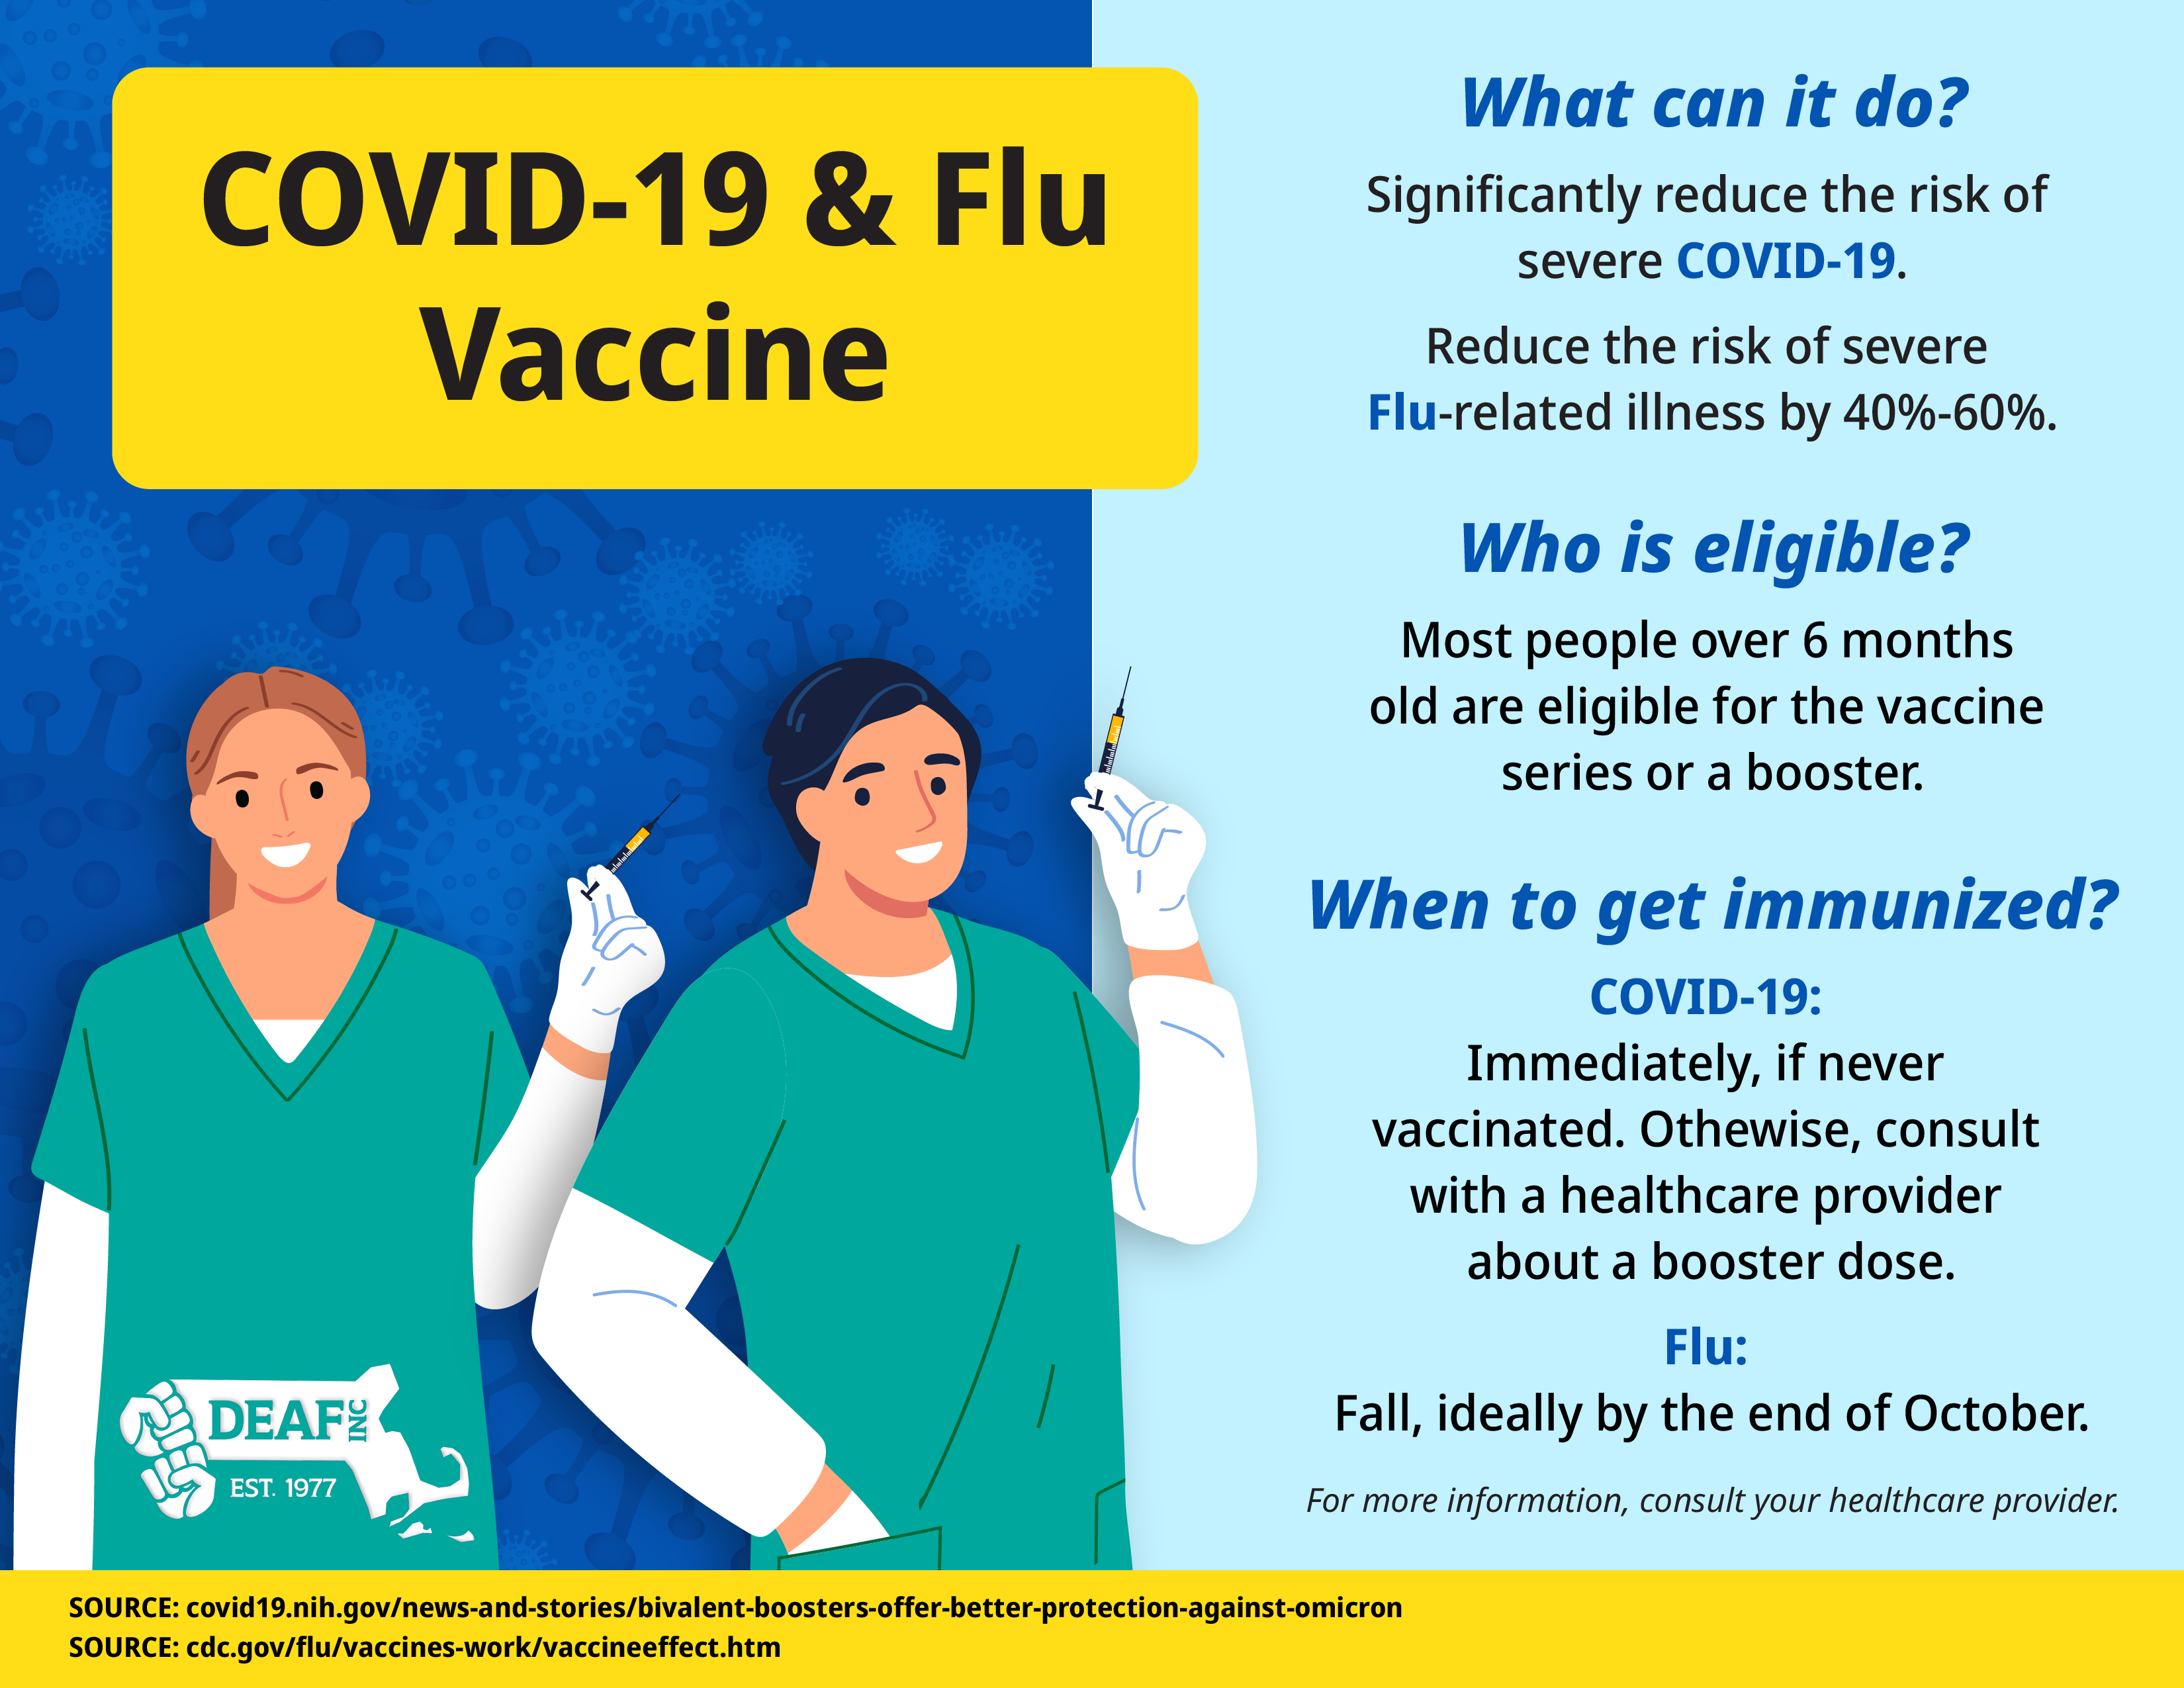 A flyer with a split dark blue and light blue background titled, “COVID-19 & Flu Vaccine” in the dark blue section. There is also an image of two medical professionals in scrubs holding needles, behind a DEAF, Inc. logo. The light blue section reads, “What can it do? Significantly reduce the risk of severe COVID-19. Reduce the risk of severe Flu-related illness by 40%-60%. Who is eligible? Most people over 6 months old are eligible for the vaccine series or a booster. When to get immunized? COVID-19: Immediately, if never vaccinated. Othewise, consult with a healthcare provider about a booster dose. Flu: Fall, ideally by the end of October. For more information, consult your healthcare provider.” A yellow strip at the bottom of the flyer shows the source information, “SOURCE: covid19.nih.gov/news-and-stories/bivalent-boosters-offer-better-protection-against-omicron SOURCE: cdc.gov/flu/vaccines-work/vaccineeffect.htm“